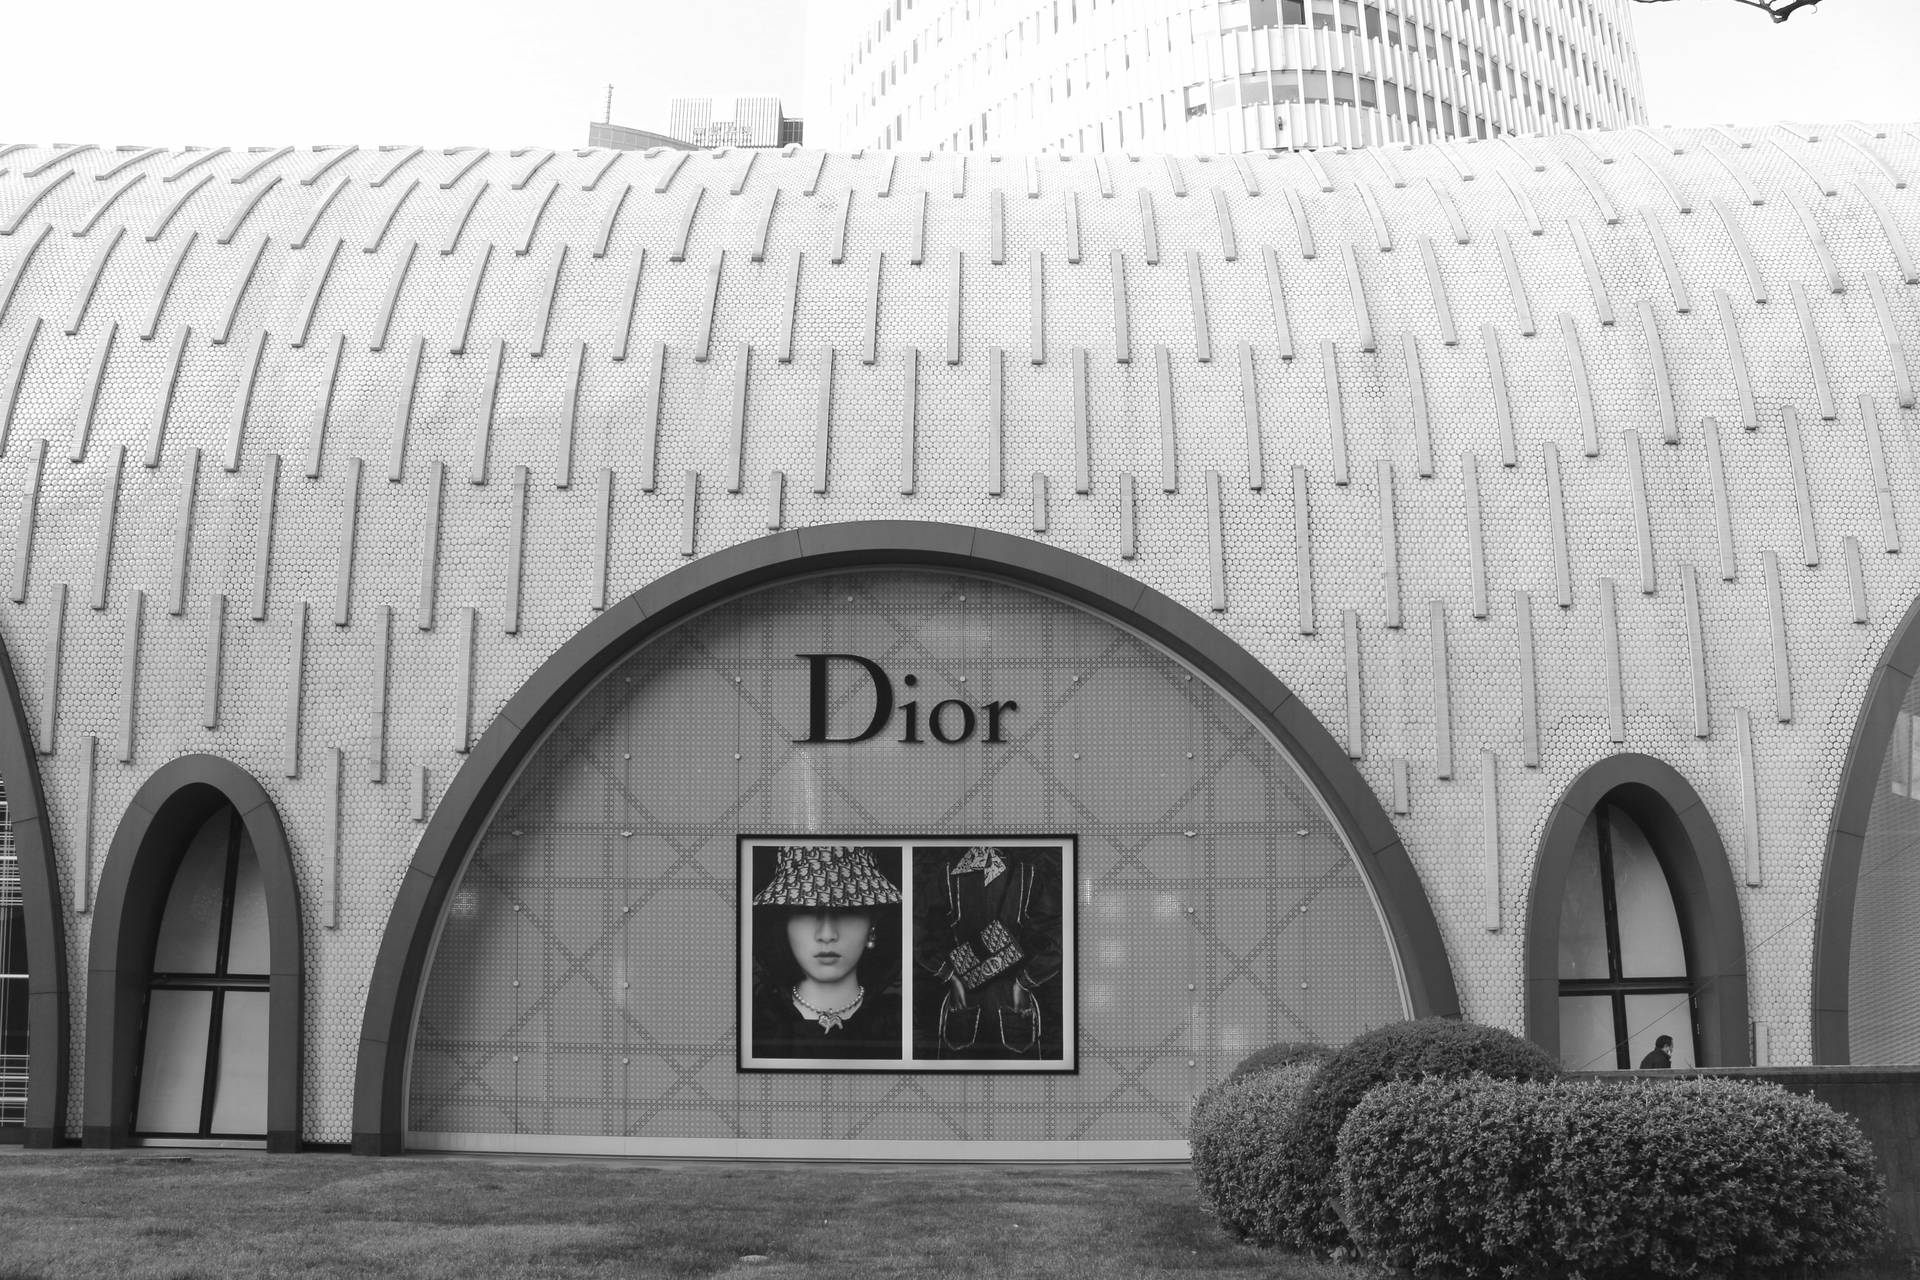 Dior 5184X3456 Wallpaper and Background Image